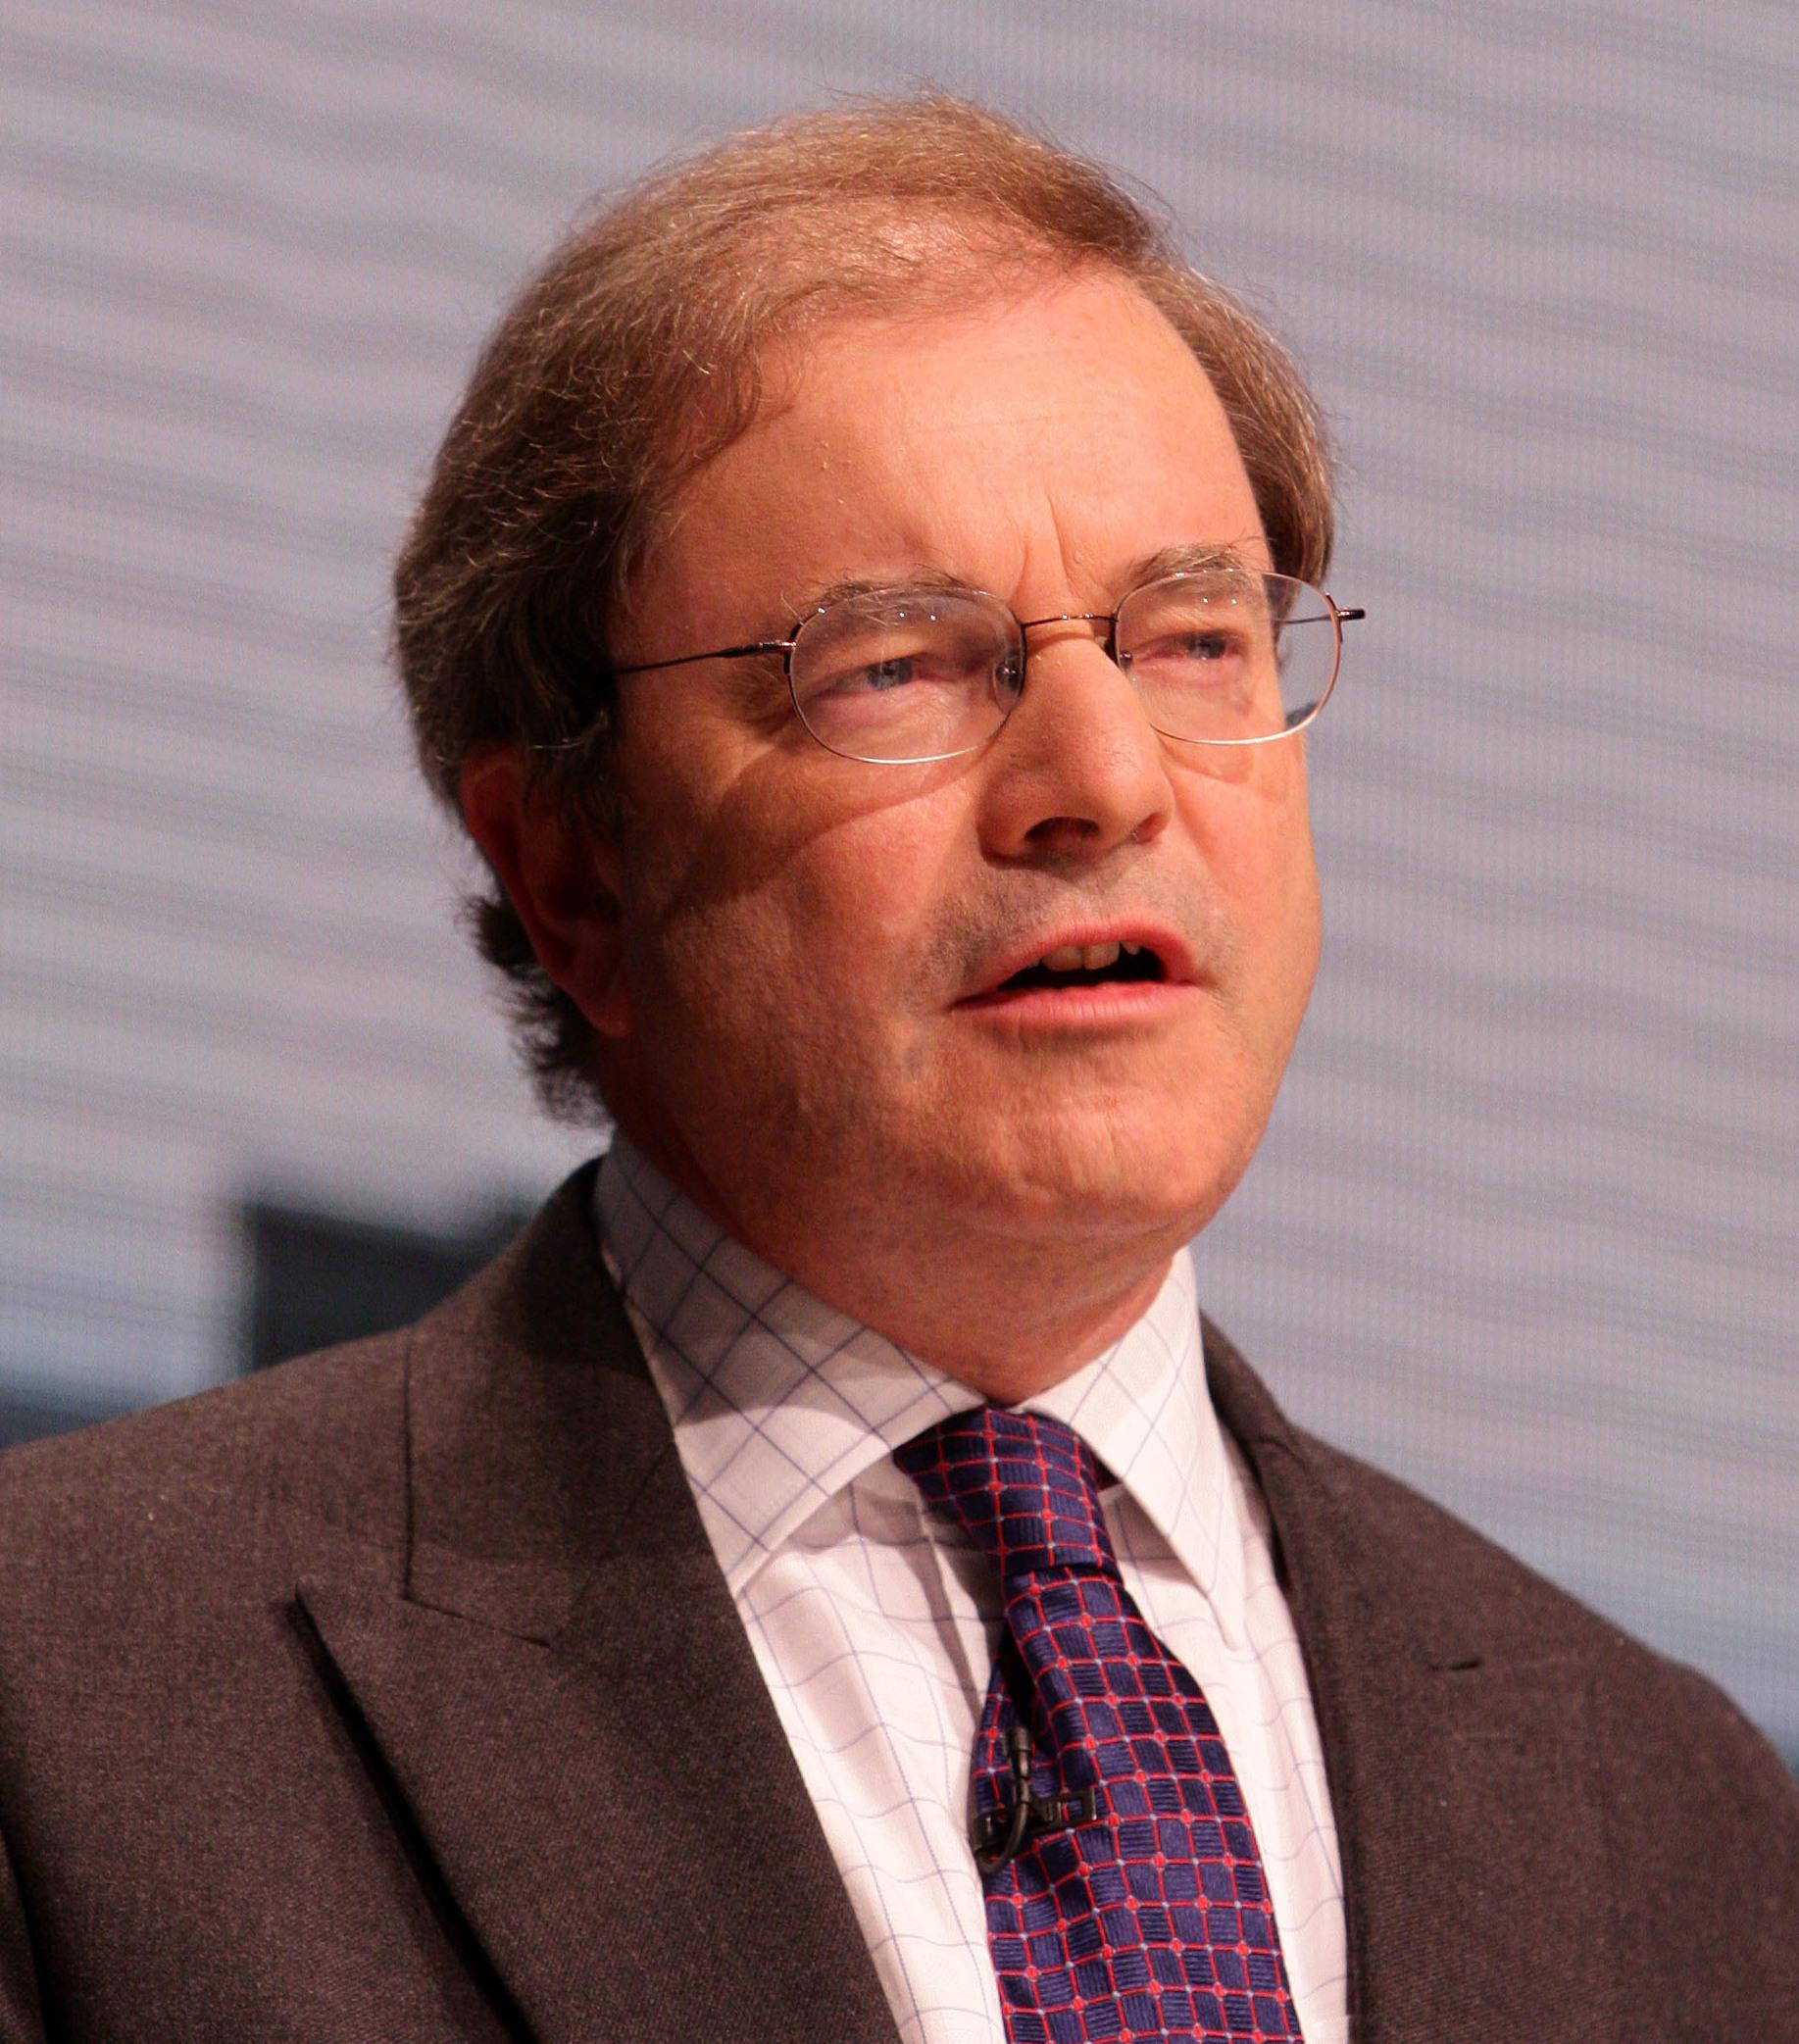 Sir Geoffrey, MP for the Cotswolds